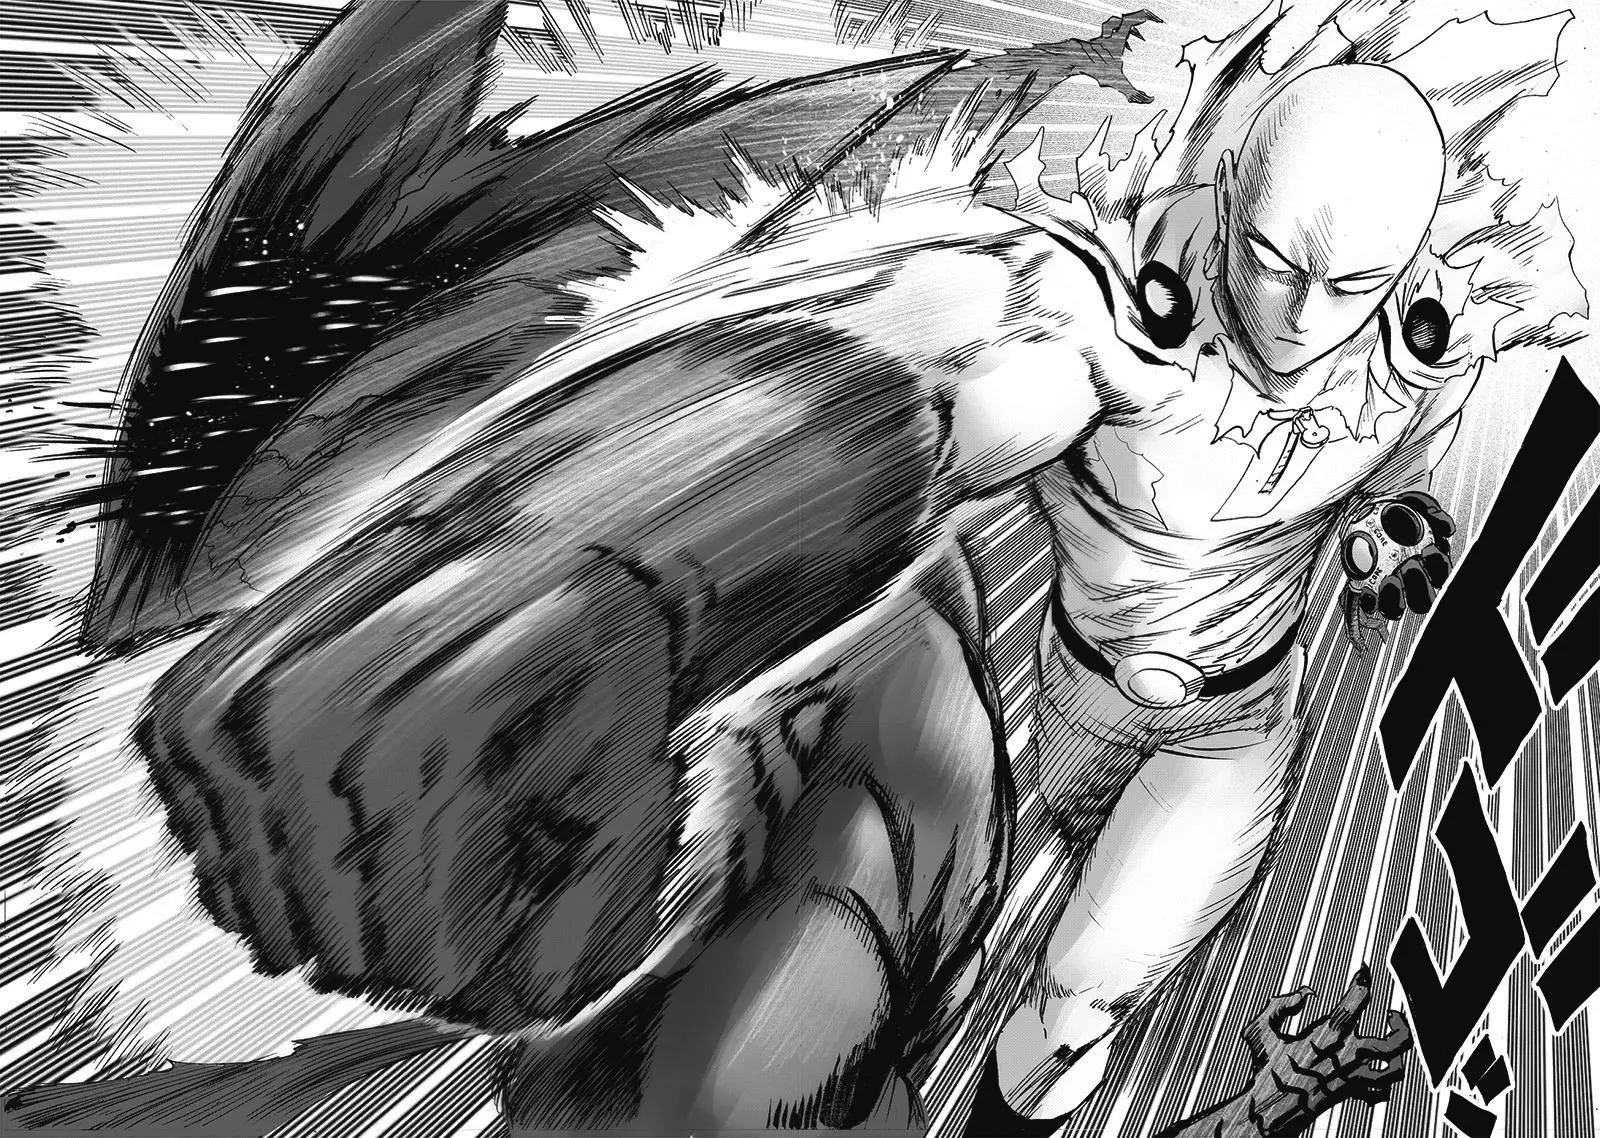 One Punch Man Chapter 167, READ One Punch Man Chapter 167 ONLINE, lost in the cloud genre,lost in the cloud gif,lost in the cloud girl,lost in the cloud goods,lost in the cloud goodreads,lost in the cloud,lost ark cloud gaming,lost odyssey cloud gaming,lost in the cloud fanart,lost in the cloud fanfic,lost in the cloud fandom,lost in the cloud first kiss,lost in the cloud font,lost in the cloud ending,lost in the cloud episode 97,lost in the cloud edit,lost in the cloud explained,lost in the cloud dog,lost in the cloud discord server,lost in the cloud desktop wallpaper,lost in the cloud drawing,can't find my cloud on network,lost in the cloud characters,lost in the cloud chapter 93 release date,lost in the cloud birthday,lost in the cloud birthday art,lost in the cloud background,lost in the cloud banner,lost in the clouds meaning,what is the black cloud in lost,lost in the cloud ao3,lost in the cloud anime,lost in the cloud art,lost in the cloud author twitter,lost in the cloud author instagram,lost in the cloud artist,lost in the cloud acrylic stand,lost in the cloud artist twitter,lost in the cloud art style,lost in the cloud analysis